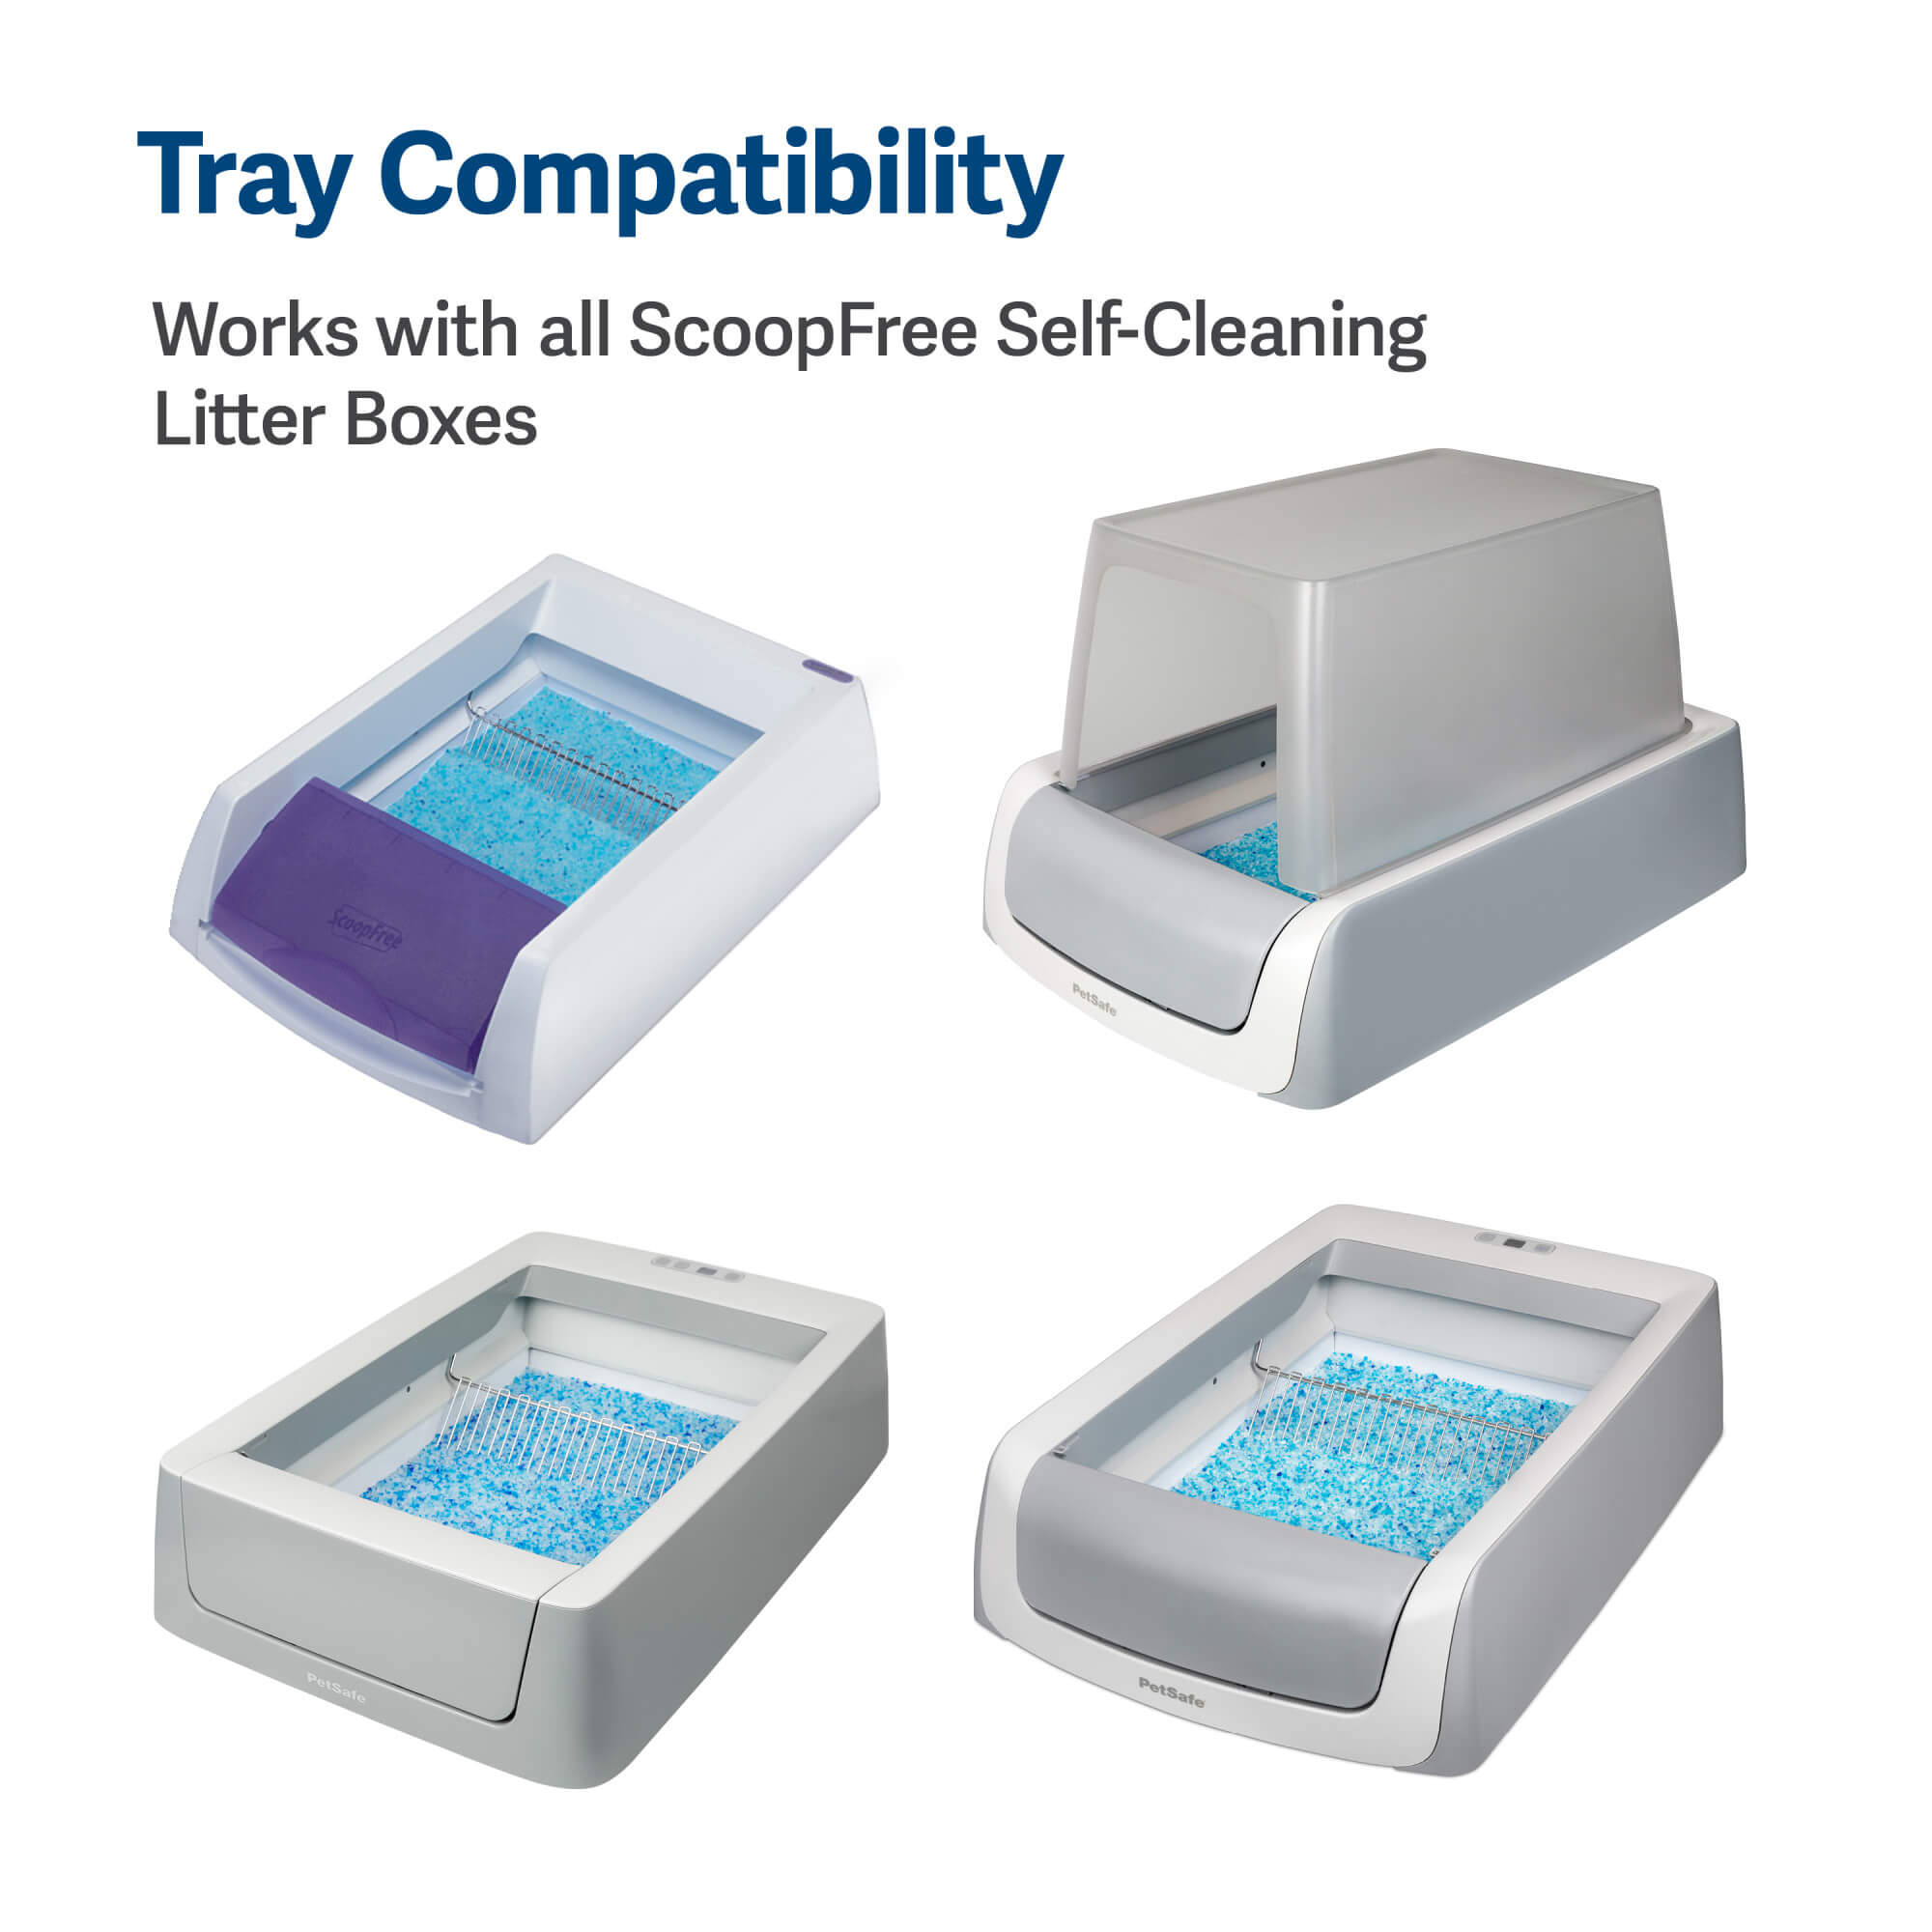 tray compatibility works with all Petsafe scoopfree self-cleaning litter boxes